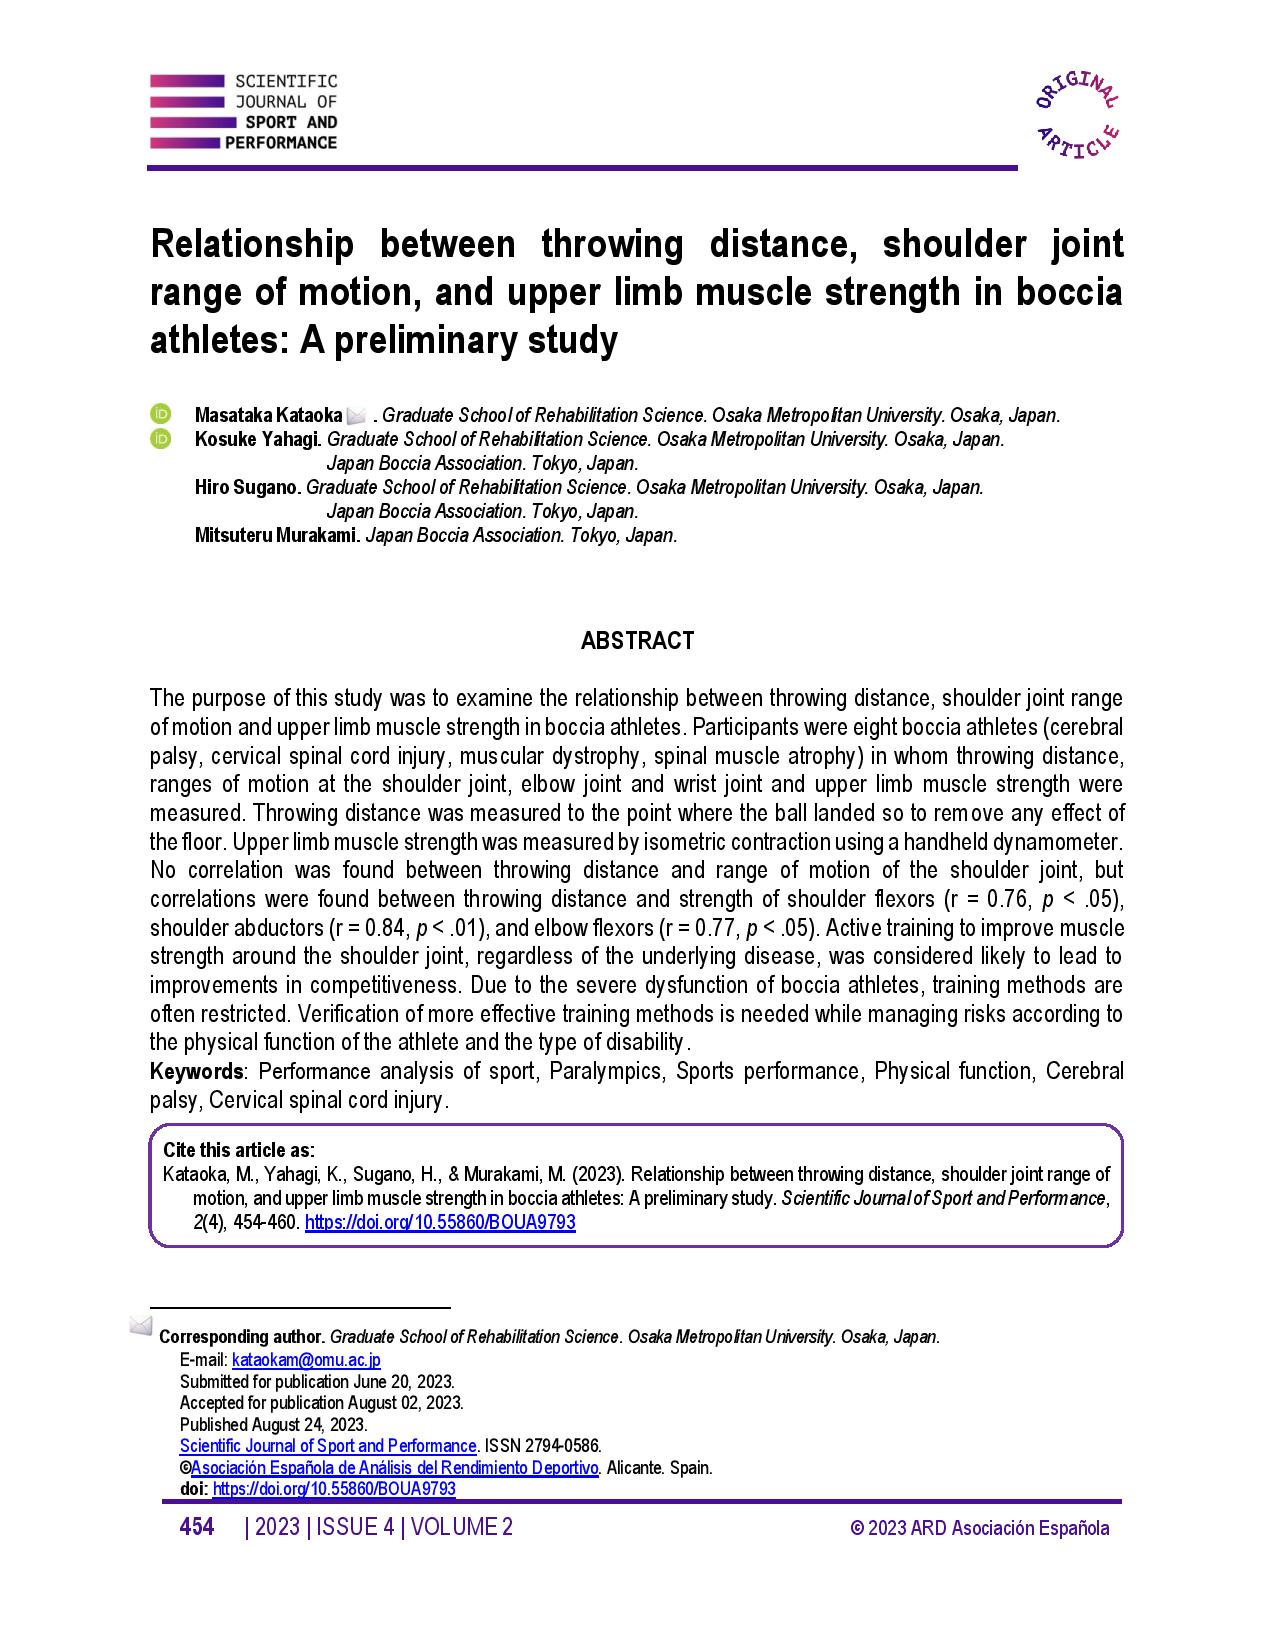 Relationship between throwing distance, shoulder joint range of motion, and upper limb muscle strength in boccia athletes: A preliminary study